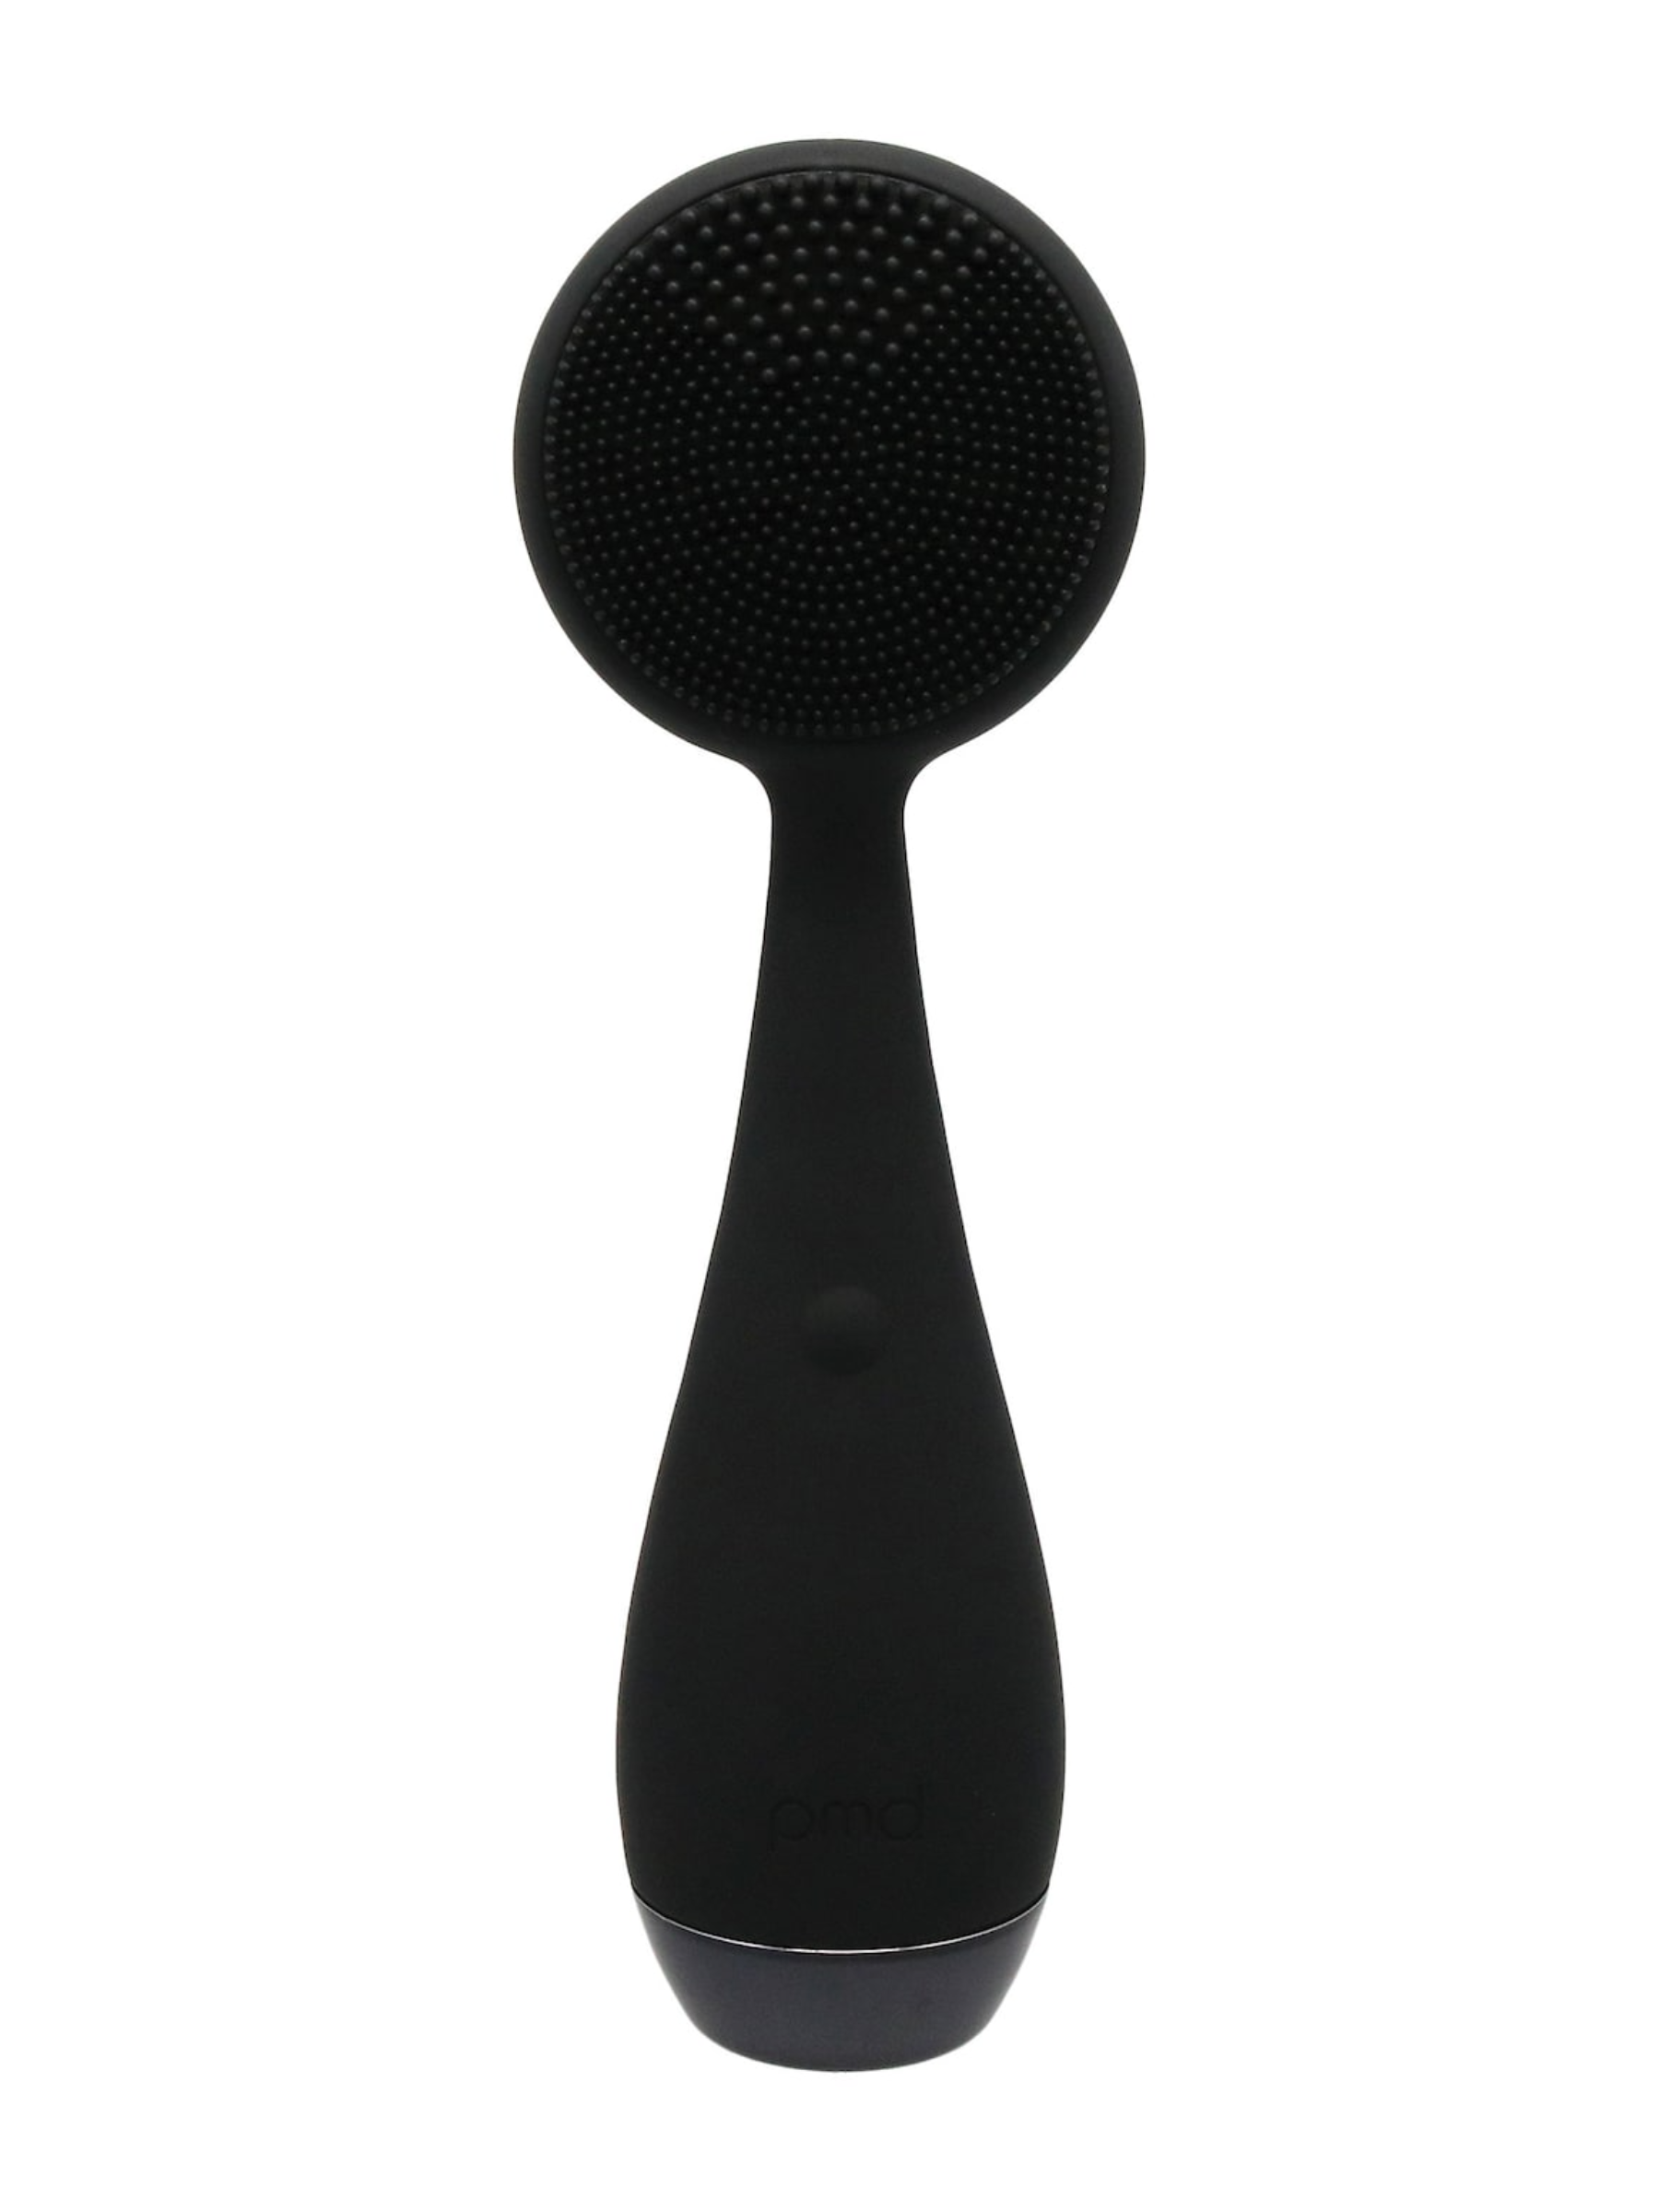 <p>If your graduate is all about skin care, this facial cleansing tool is the way to go. It's like giving them their own personal facialist. The device uses sonic vibrations for deep cleaning, while the obsidian stone helps soothe and de-puff the skin. It's a thoughtful gift to help them keep glowing as they embark on their new journey. Plus, <em>Glamour</em> editors give it their <a href="https://www.glamour.com/story/pmd-clean-review?mbid=synd_msn_rss&utm_source=msn&utm_medium=syndication">stamp of approval</a>.</p> <p><em>Save when you shop for the best graduation ideas with these <a href="https://www.glamour.com/coupons/sephora?mbid=synd_msn_rss&utm_source=msn&utm_medium=syndication">Sephora promo codes</a></em>.</p> $179, Sephora. <a href="https://www.sephora.com/product/pmd-clean-pro-obsidian-P467970">Get it now!</a><p>Sign up for today’s biggest stories, from pop culture to politics.</p><a href="https://www.glamour.com/newsletter/news?sourceCode=msnsend">Sign Up</a>